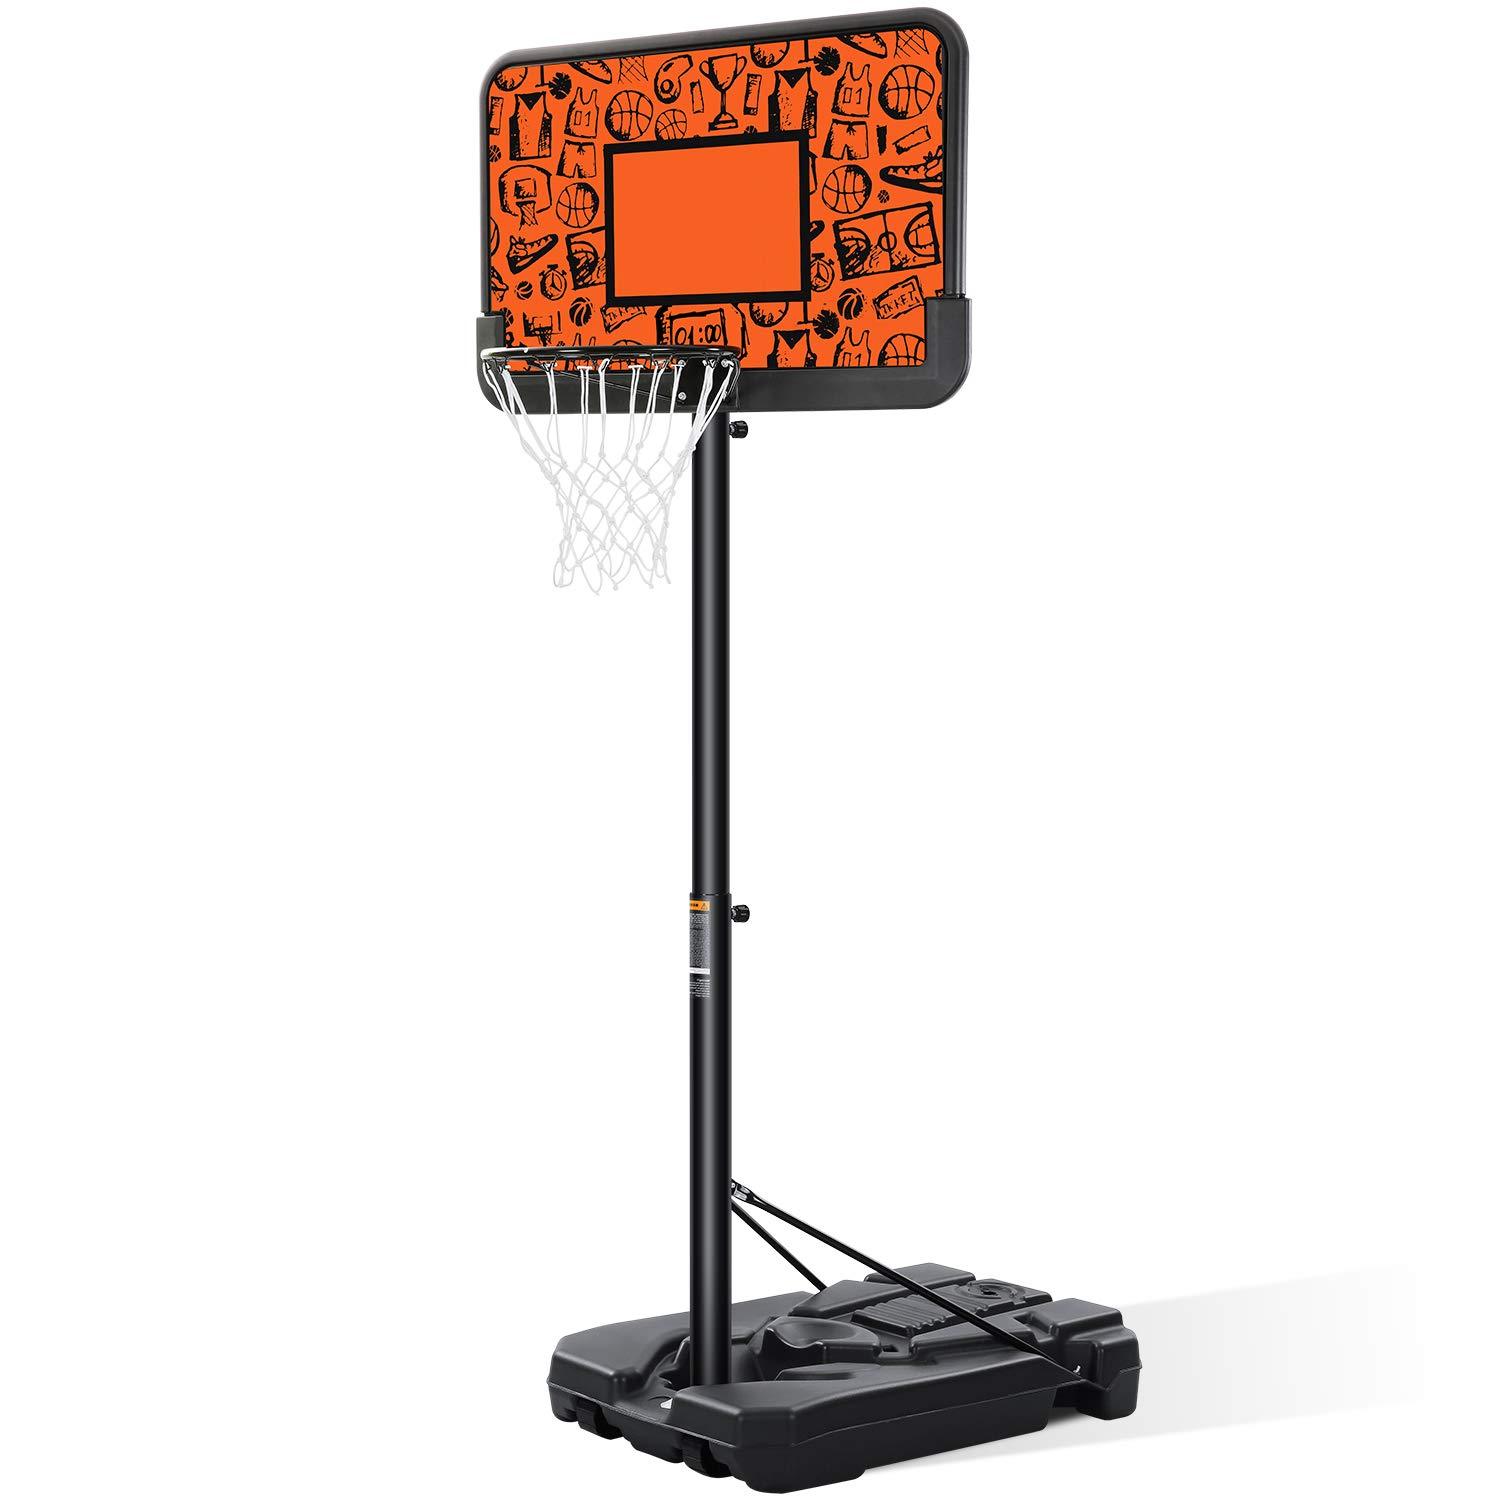 Load image into Gallery viewer, MaxKare Basketball Hoop Goal Portable Basketball System Set Stand Adjustable Height Poolside Outdoor Indoor for Kid Adult Pool W Aluminum Alloy Anti-Rust Large Backboard - NAIPO
